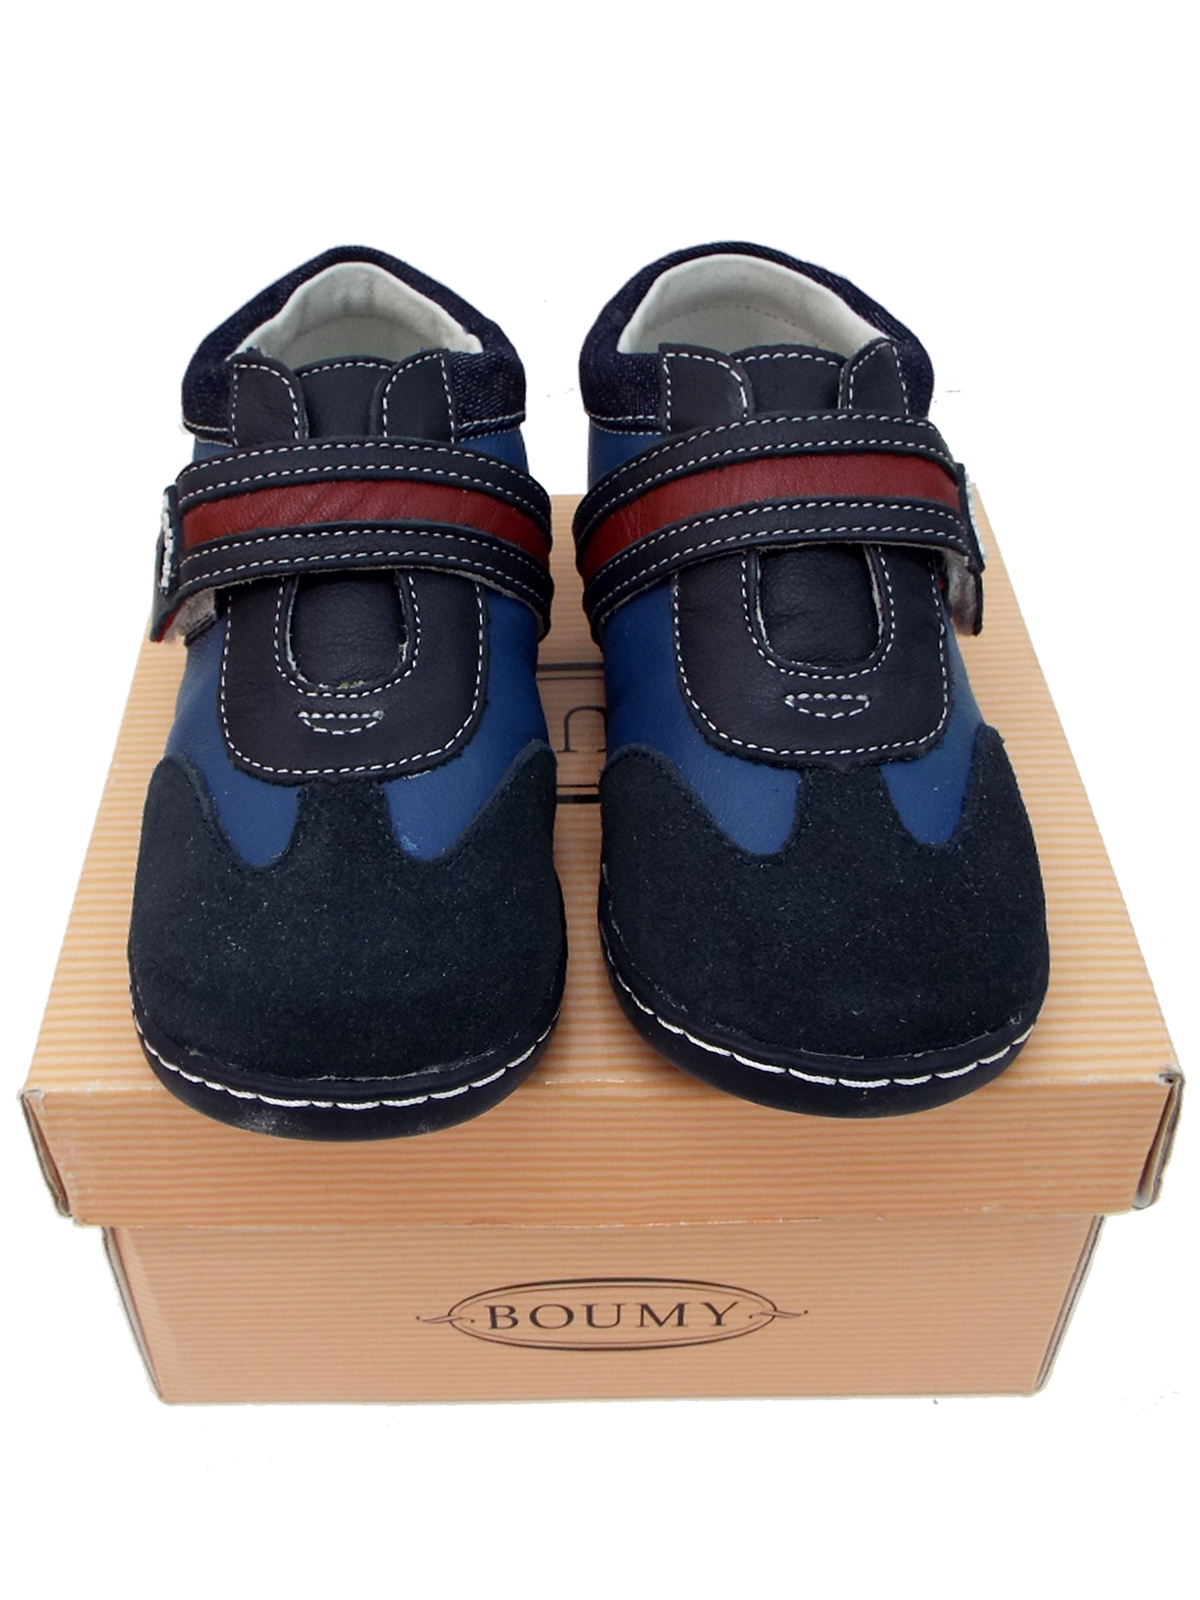 Boumy - - Boumy Boys COBALT Genuine Leather Outdoor Shoes - Shoe Size 4 ...